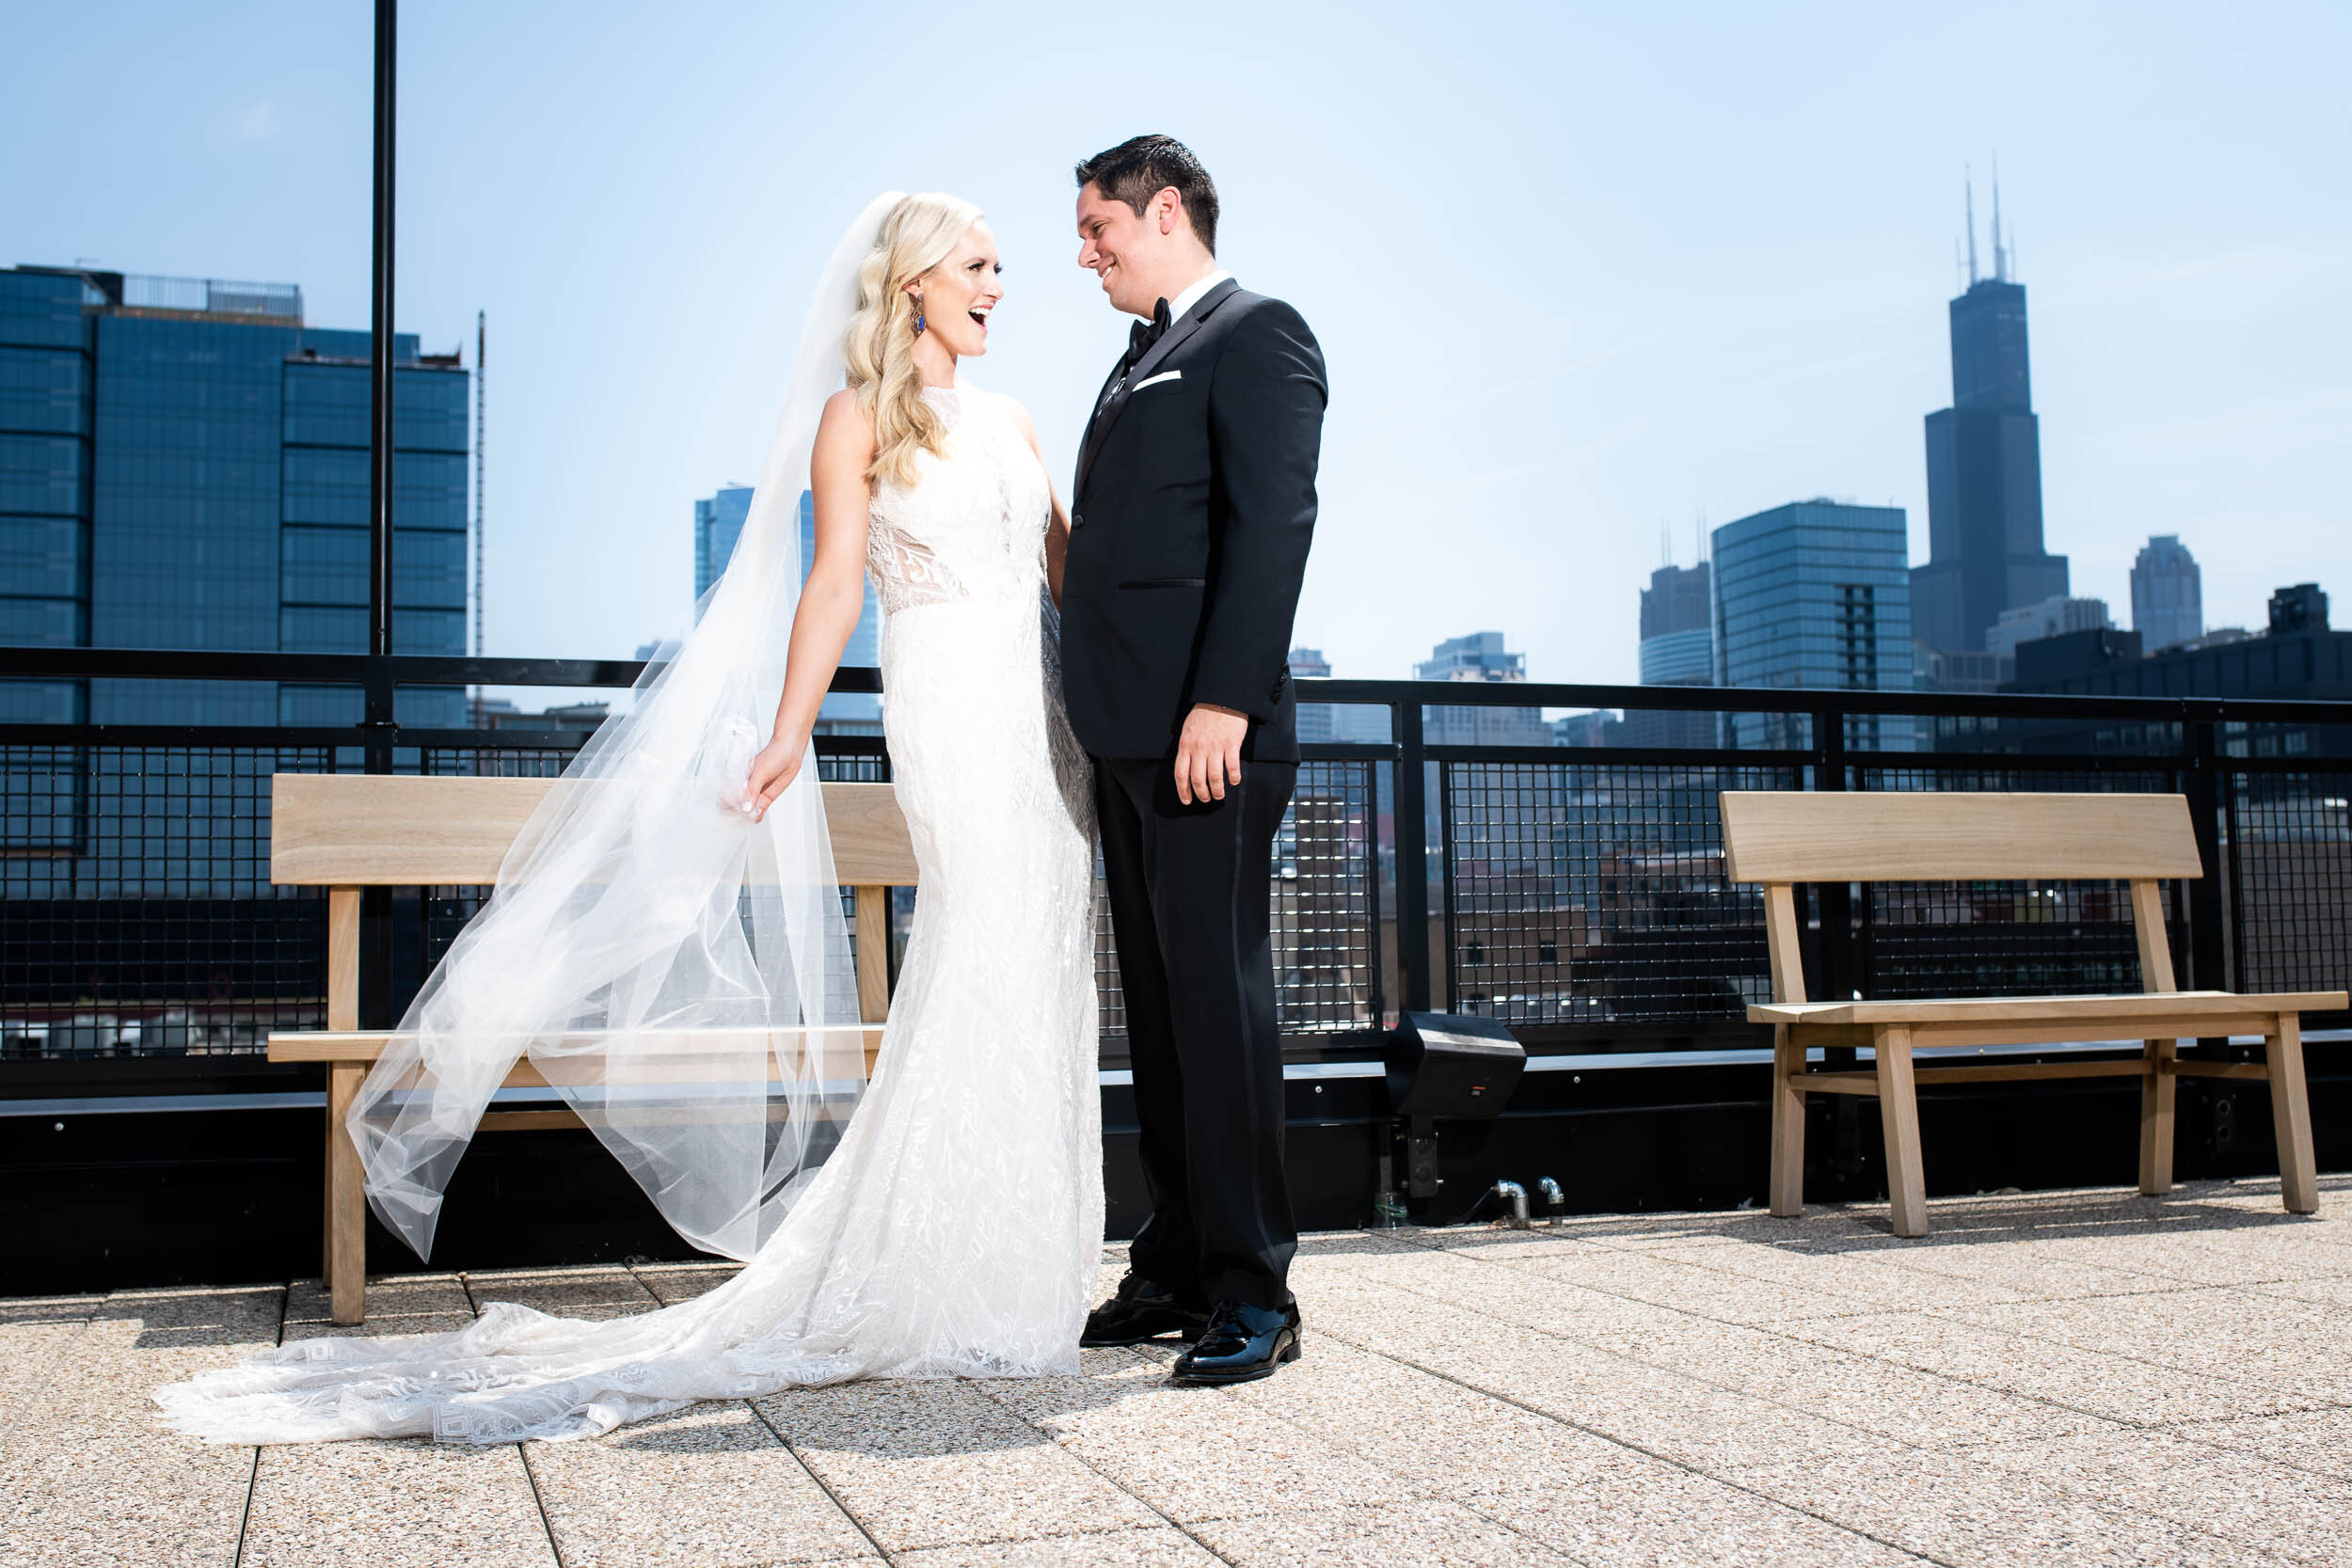 City skyline wedding photography: Carnivale Chicago Wedding captured by J. Brown Photography